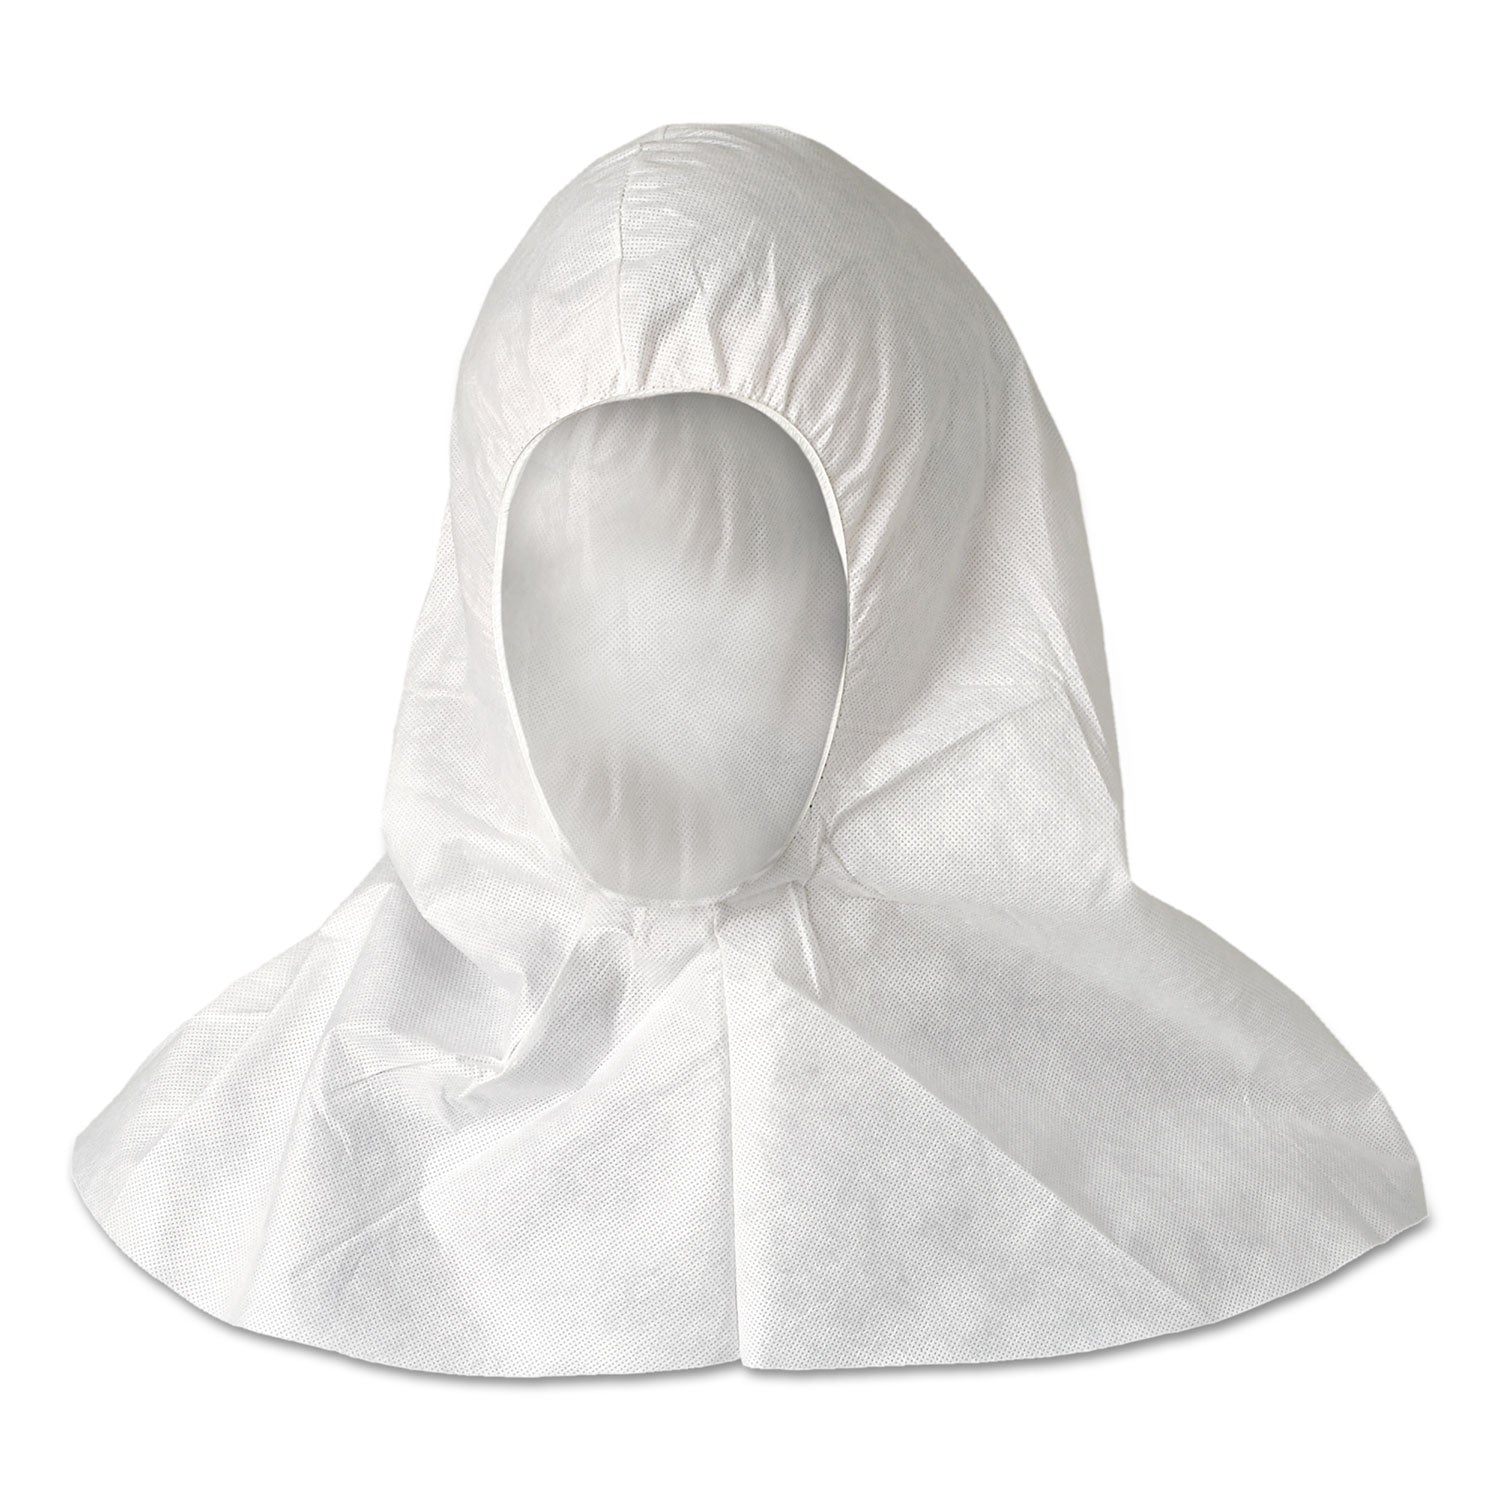 a20-breathable-particle-protection-hood-one-size-fits-all-white-100-carton_kcc36890 - 1